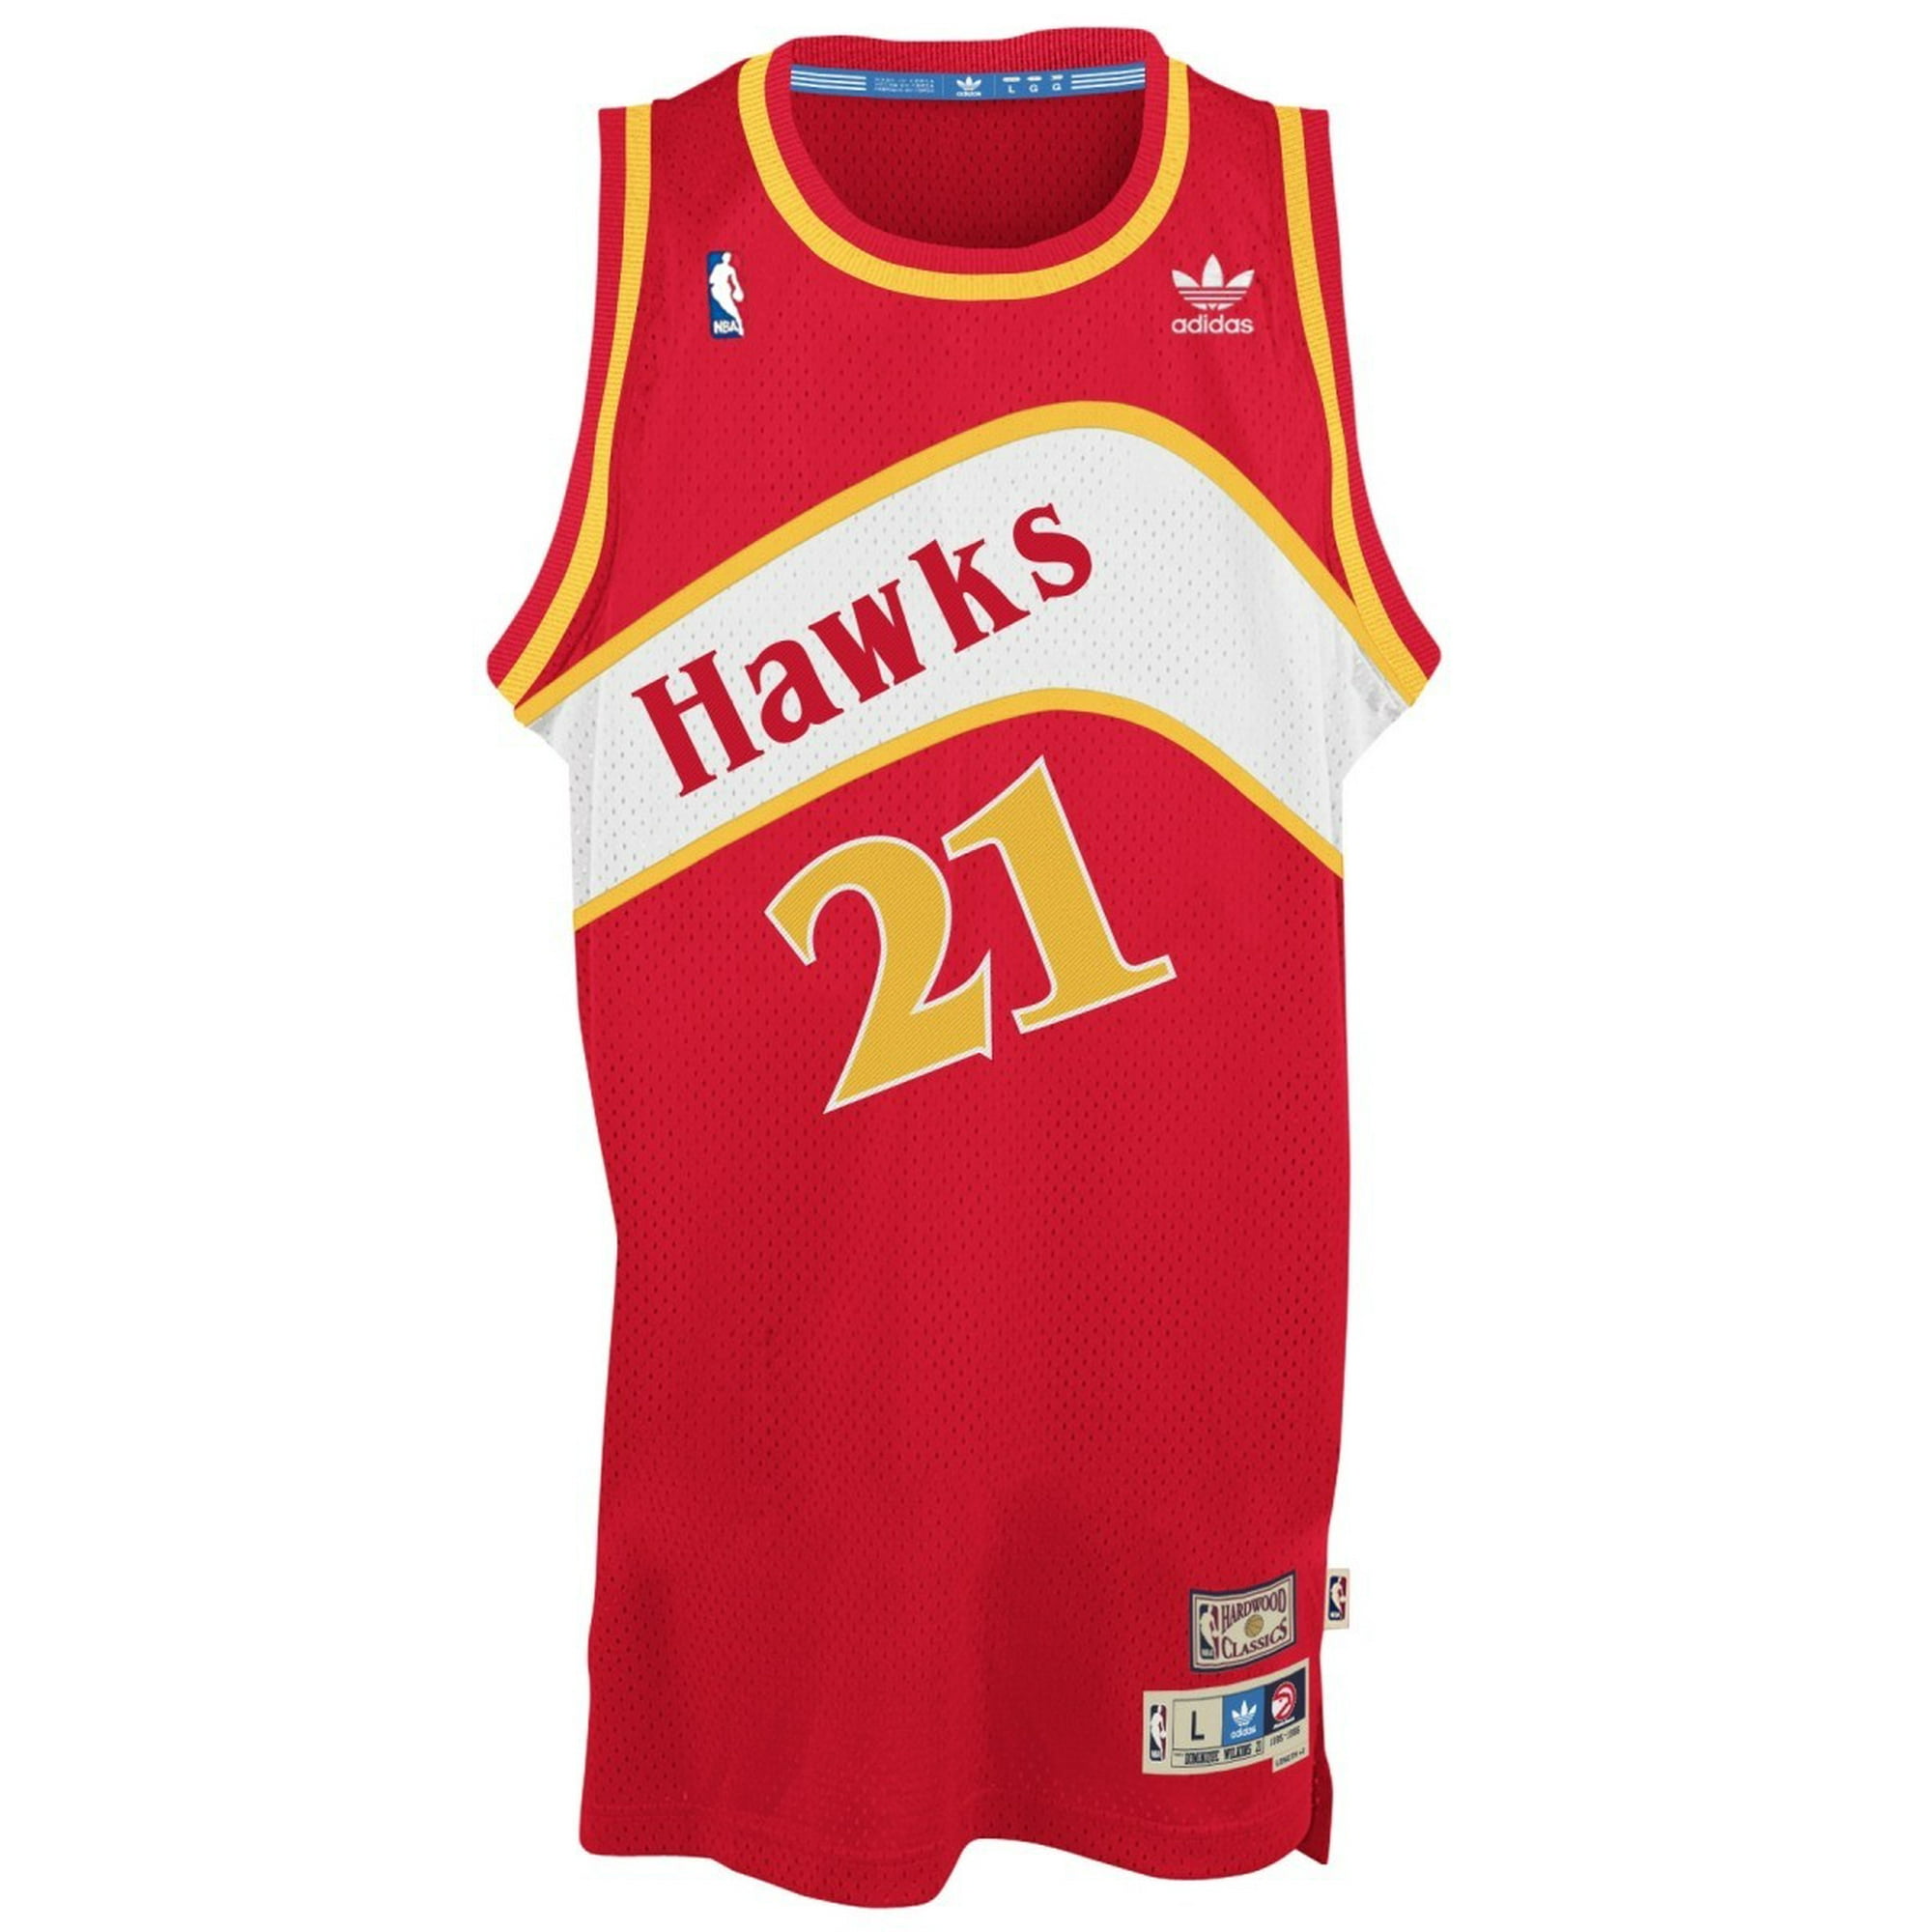 NBA Official Jerseys  Authentic and Throwback NBA Jerseys